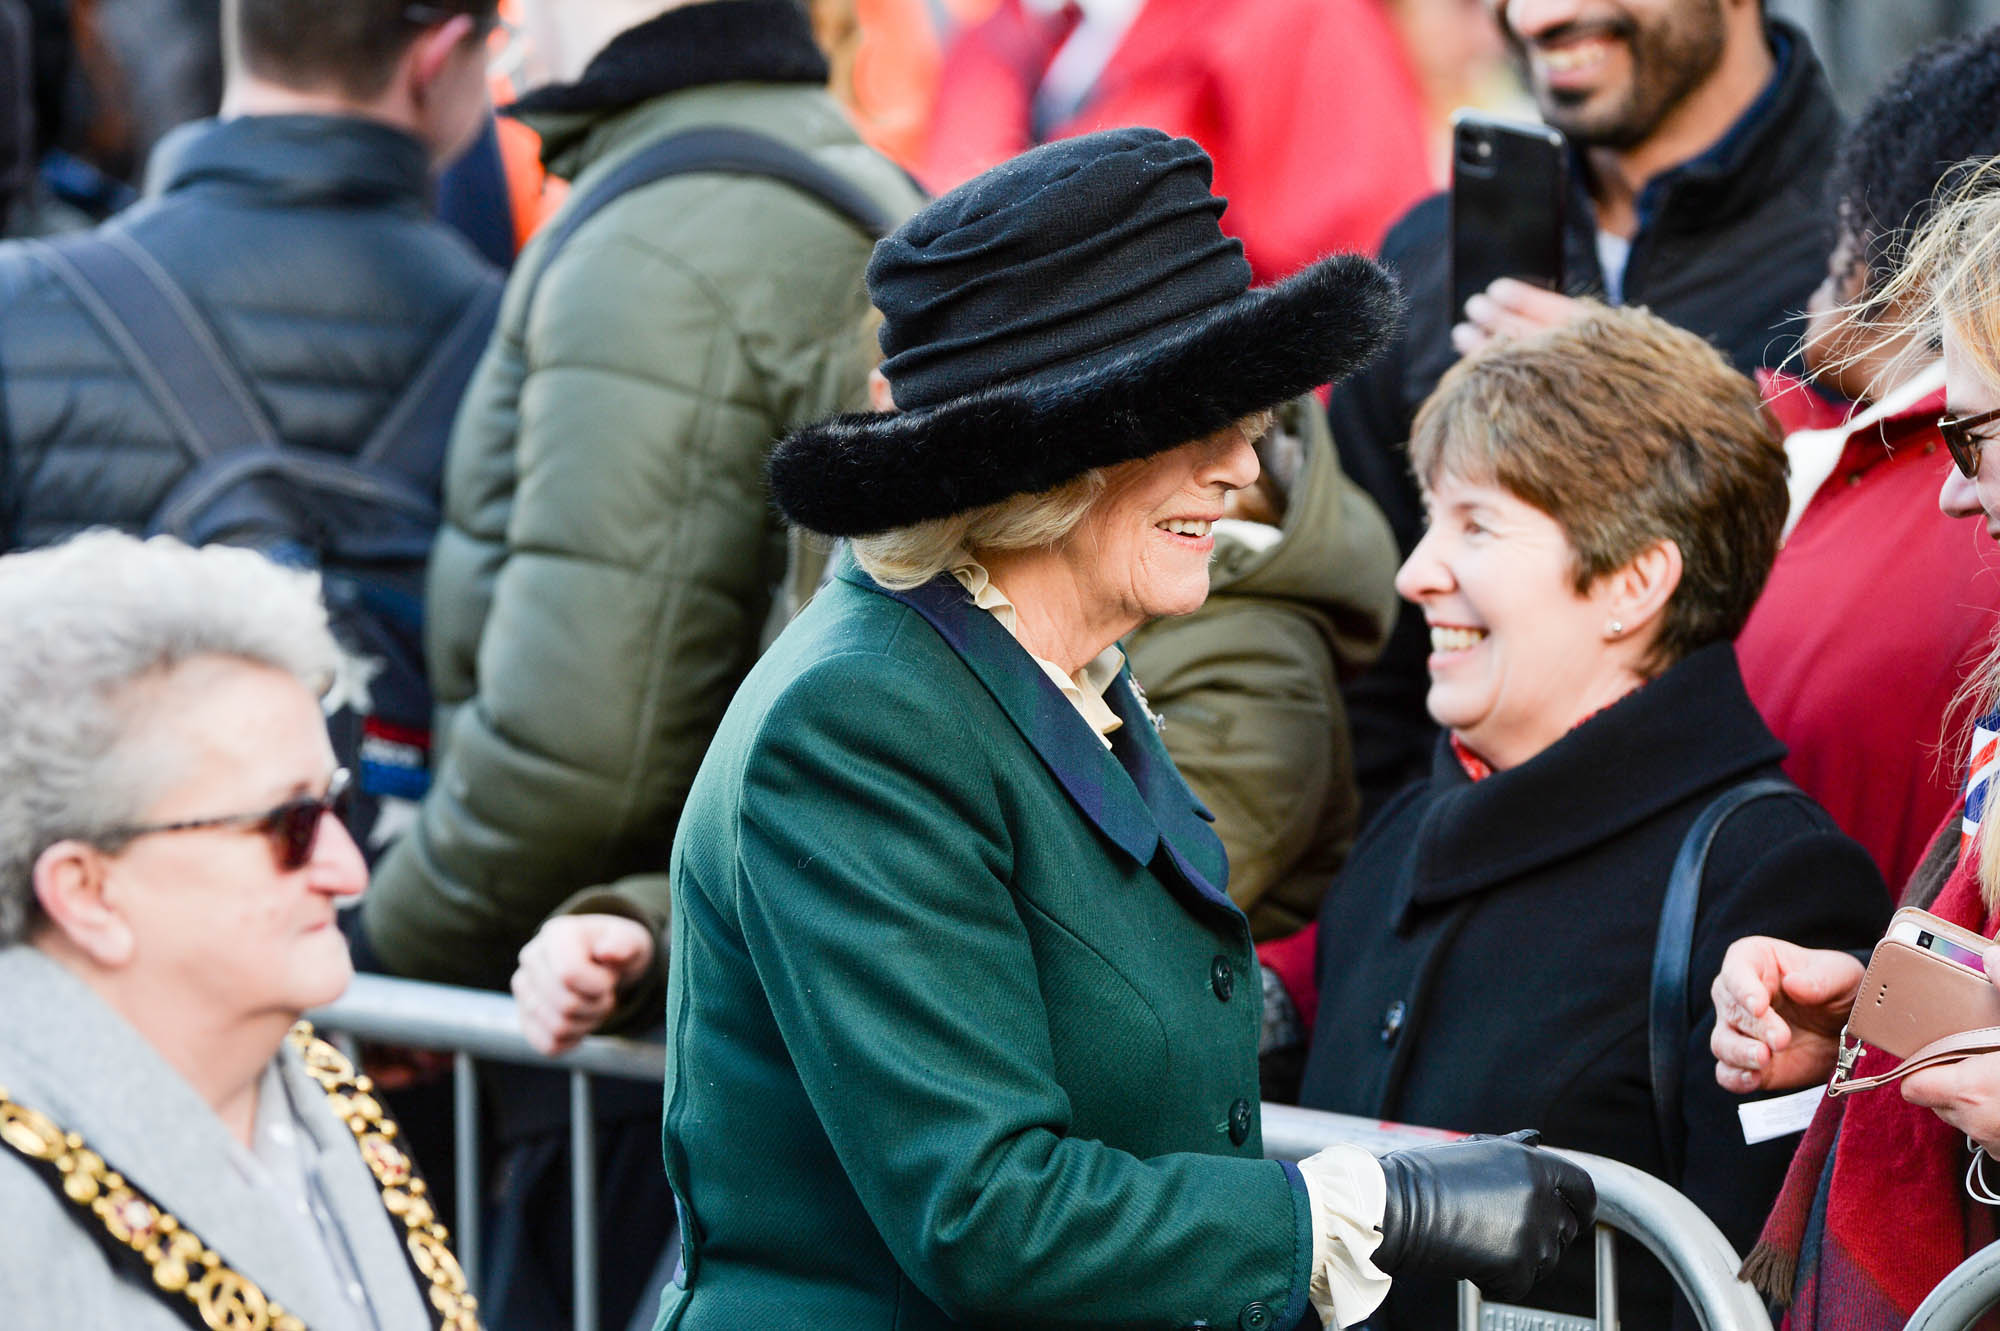 Camilla, Duchess of Cornwall, meeting the public in Leicester, 2020 - 